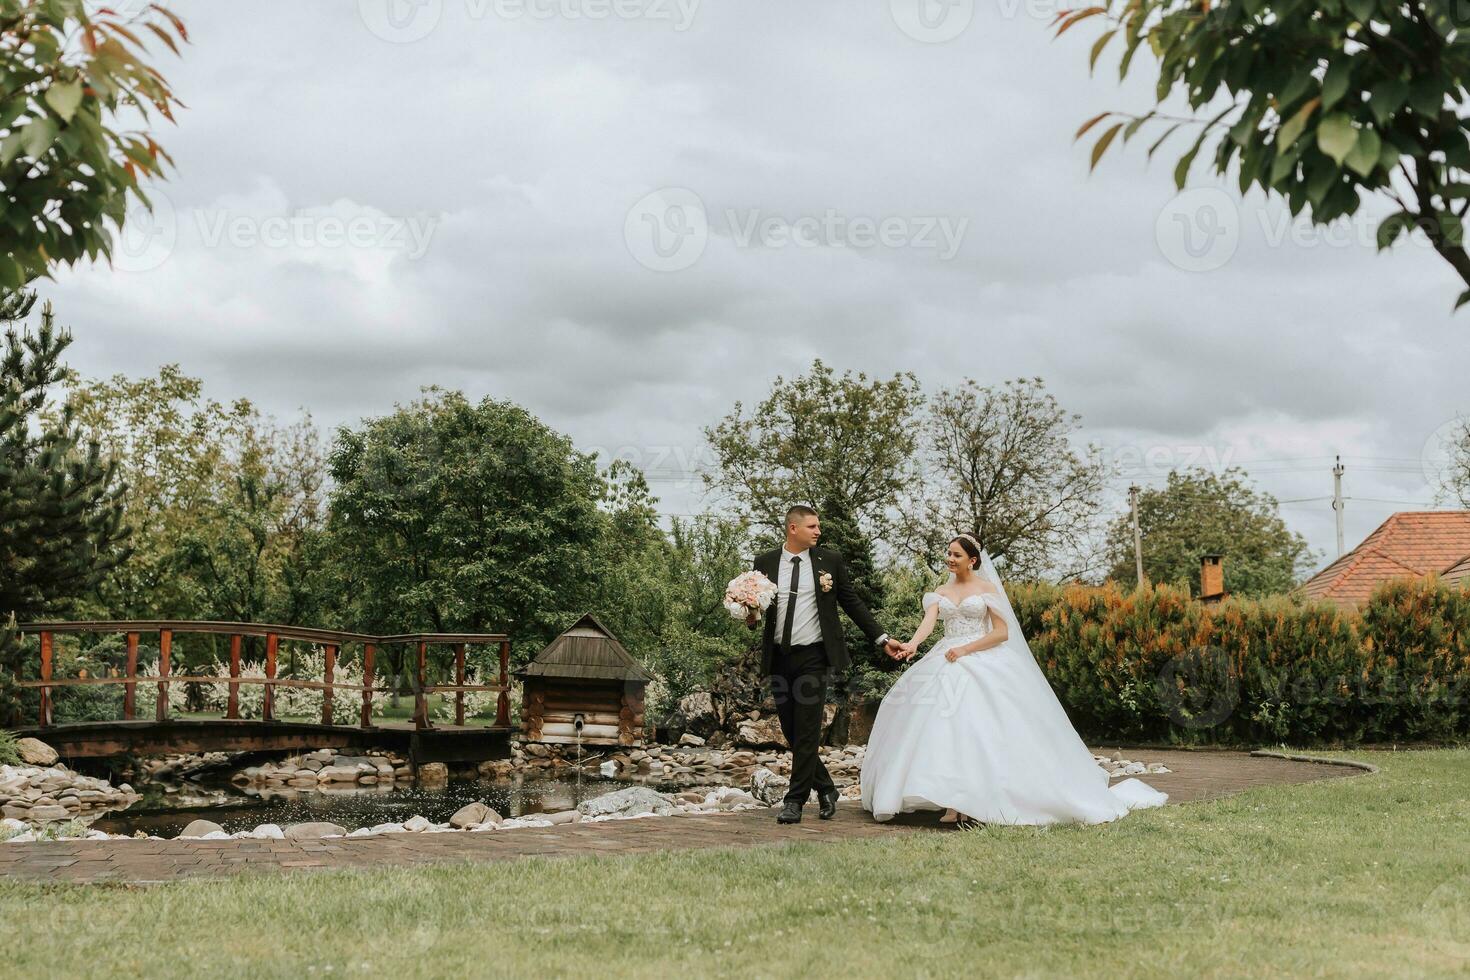 The bride and groom are walking and holding hands, looking at each other. Wide-angle photo in an overcast sky.